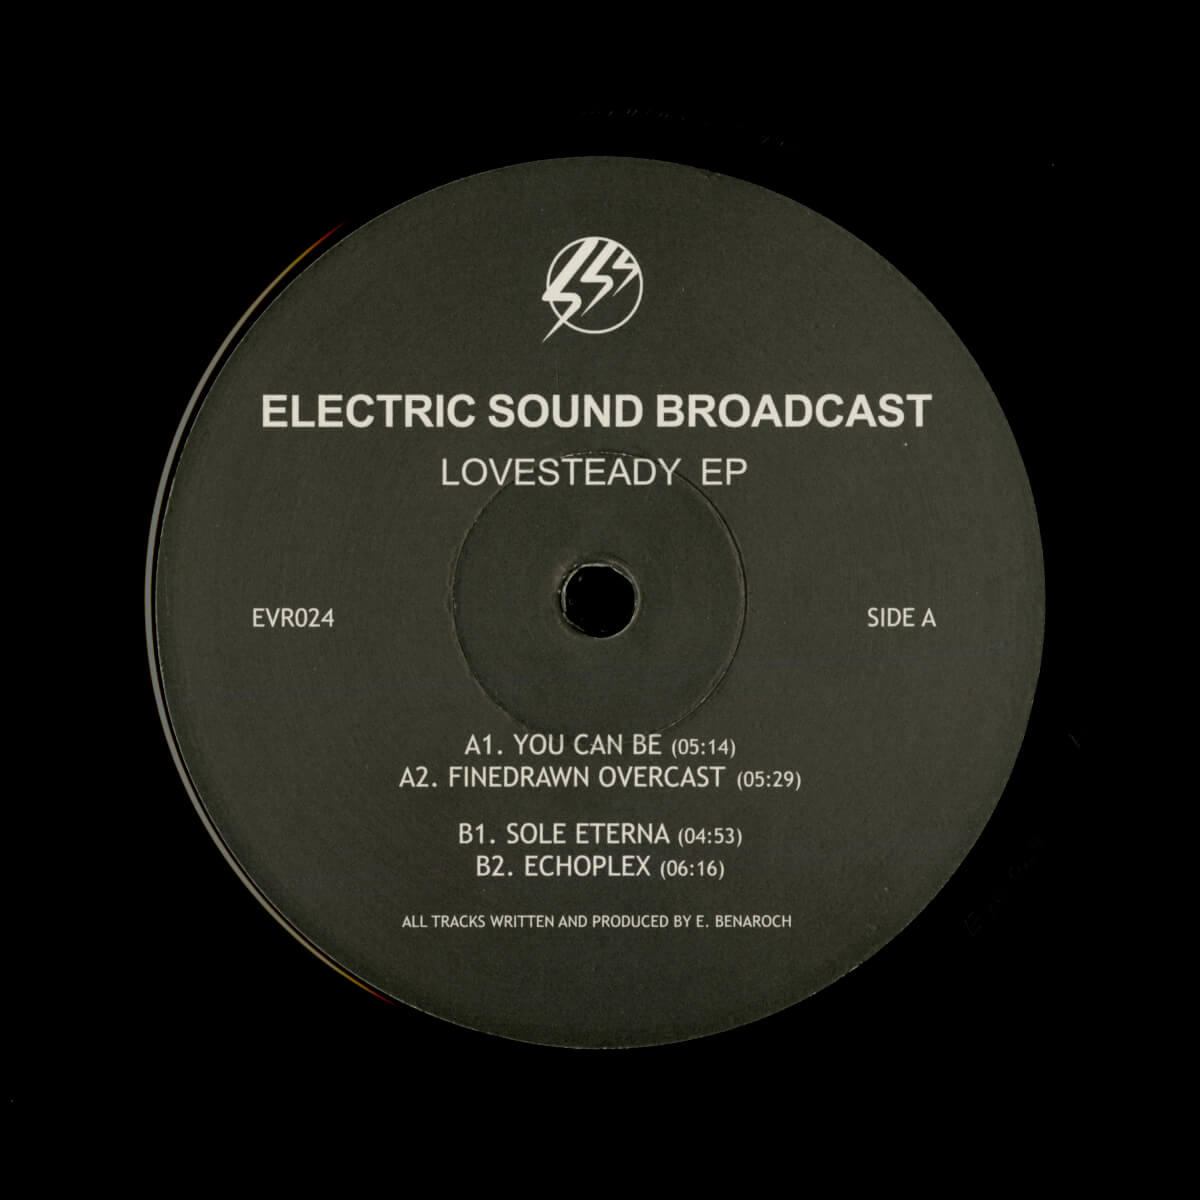 Electric Sound Broadcast – Lovesteady EP